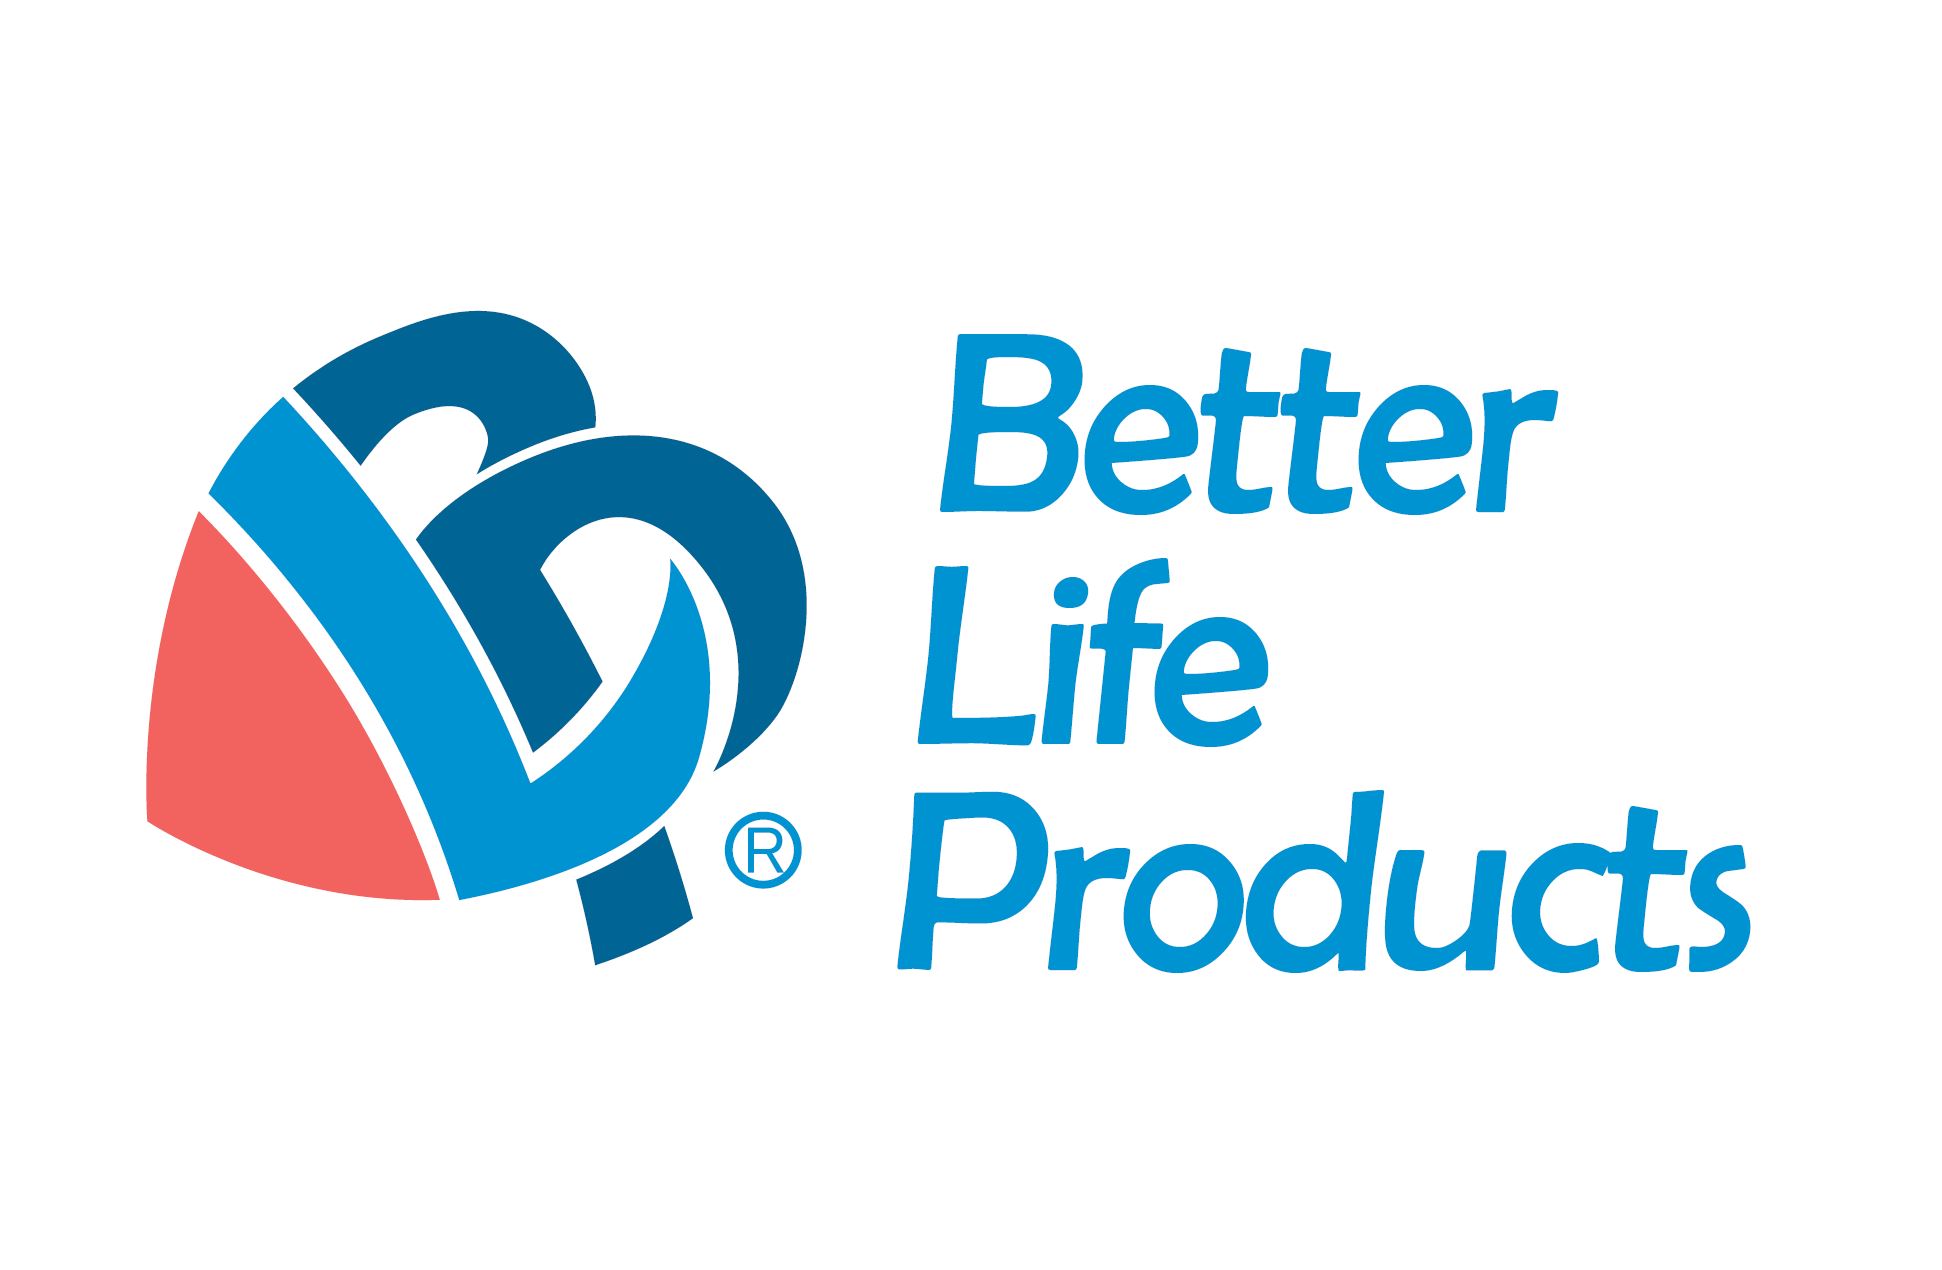 (c) Betterlifeproducts.at